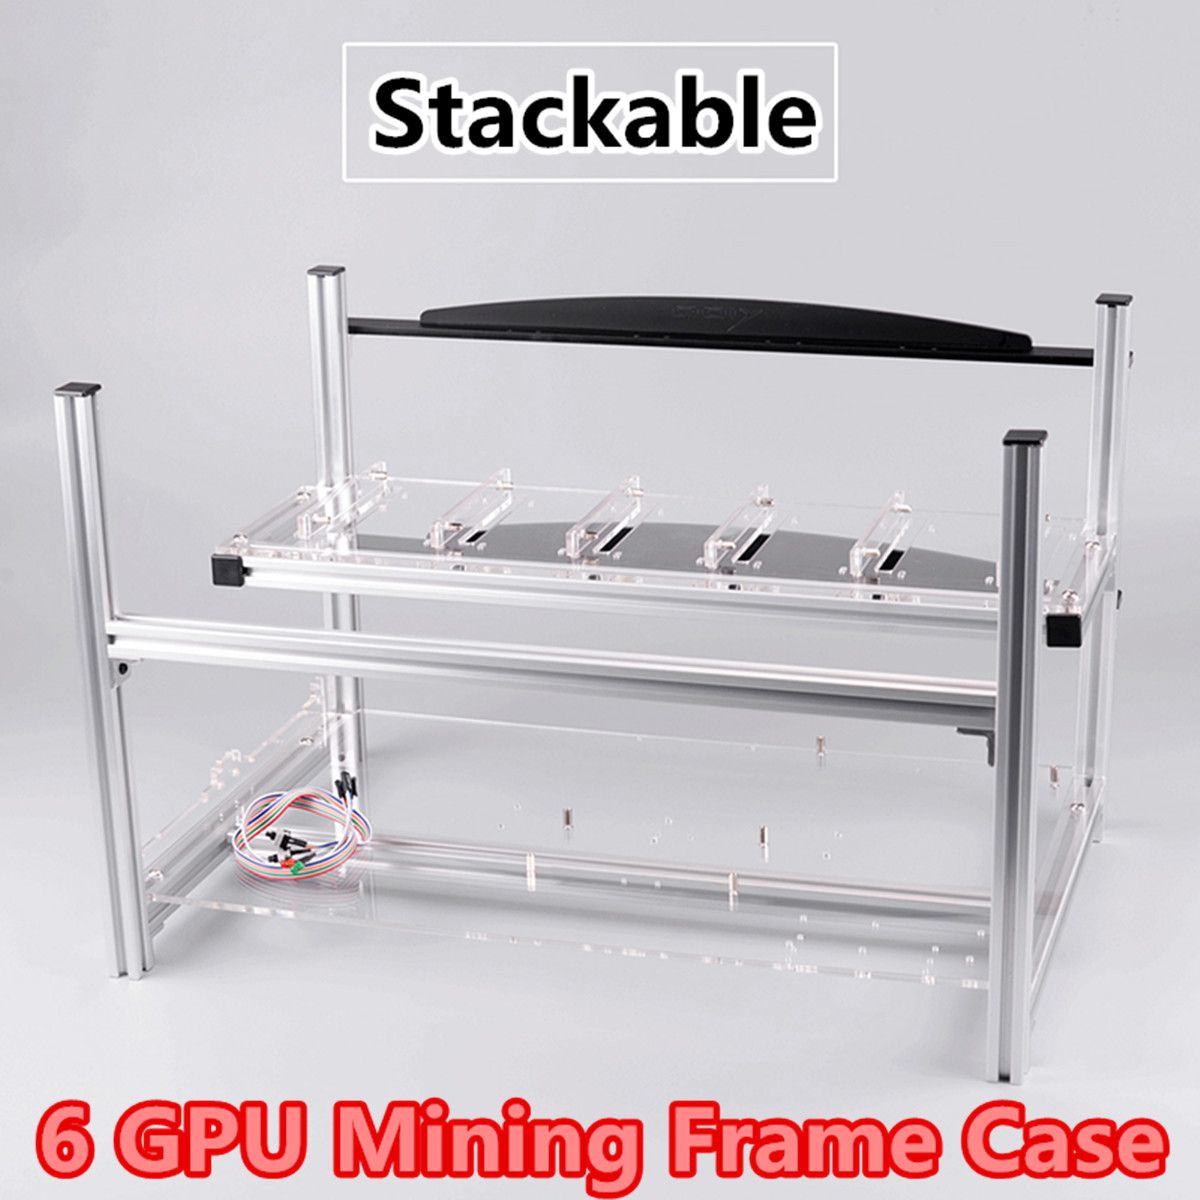 Aluminum-Open-Air-Frame-Mining-Miner-Rig-Case-Stackable-For-6-GPU-ETH-Ethereum-1243675